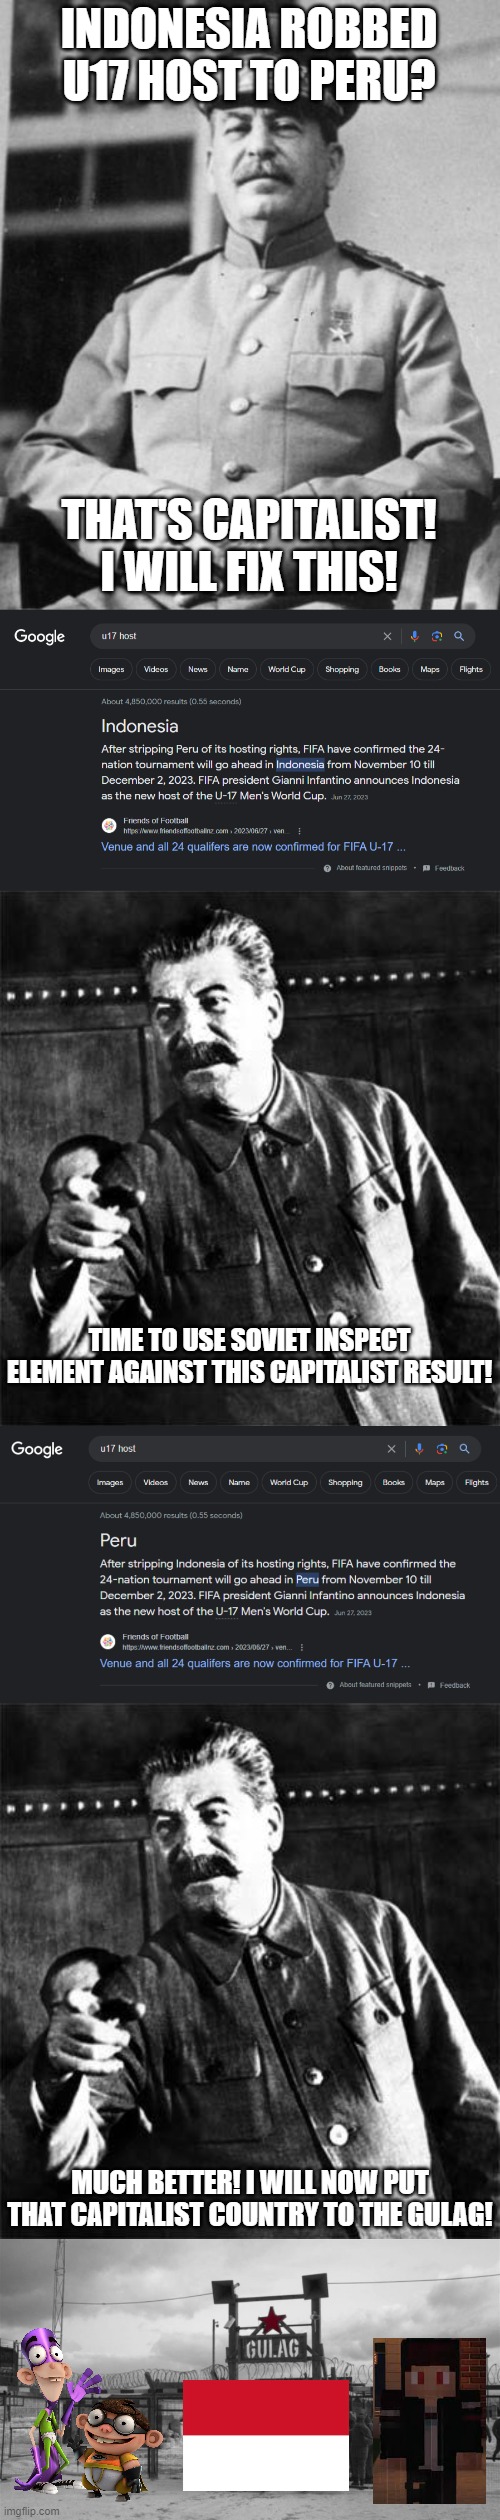 Matias told me to make this (Team_KrewFam) | INDONESIA ROBBED U17 HOST TO PERU? THAT'S CAPITALIST! I WILL FIX THIS! TIME TO USE SOVIET INSPECT ELEMENT AGAINST THIS CAPITALIST RESULT! MUCH BETTER! I WILL NOW PUT THAT CAPITALIST COUNTRY TO THE GULAG! | image tagged in stalin,gulag | made w/ Imgflip meme maker